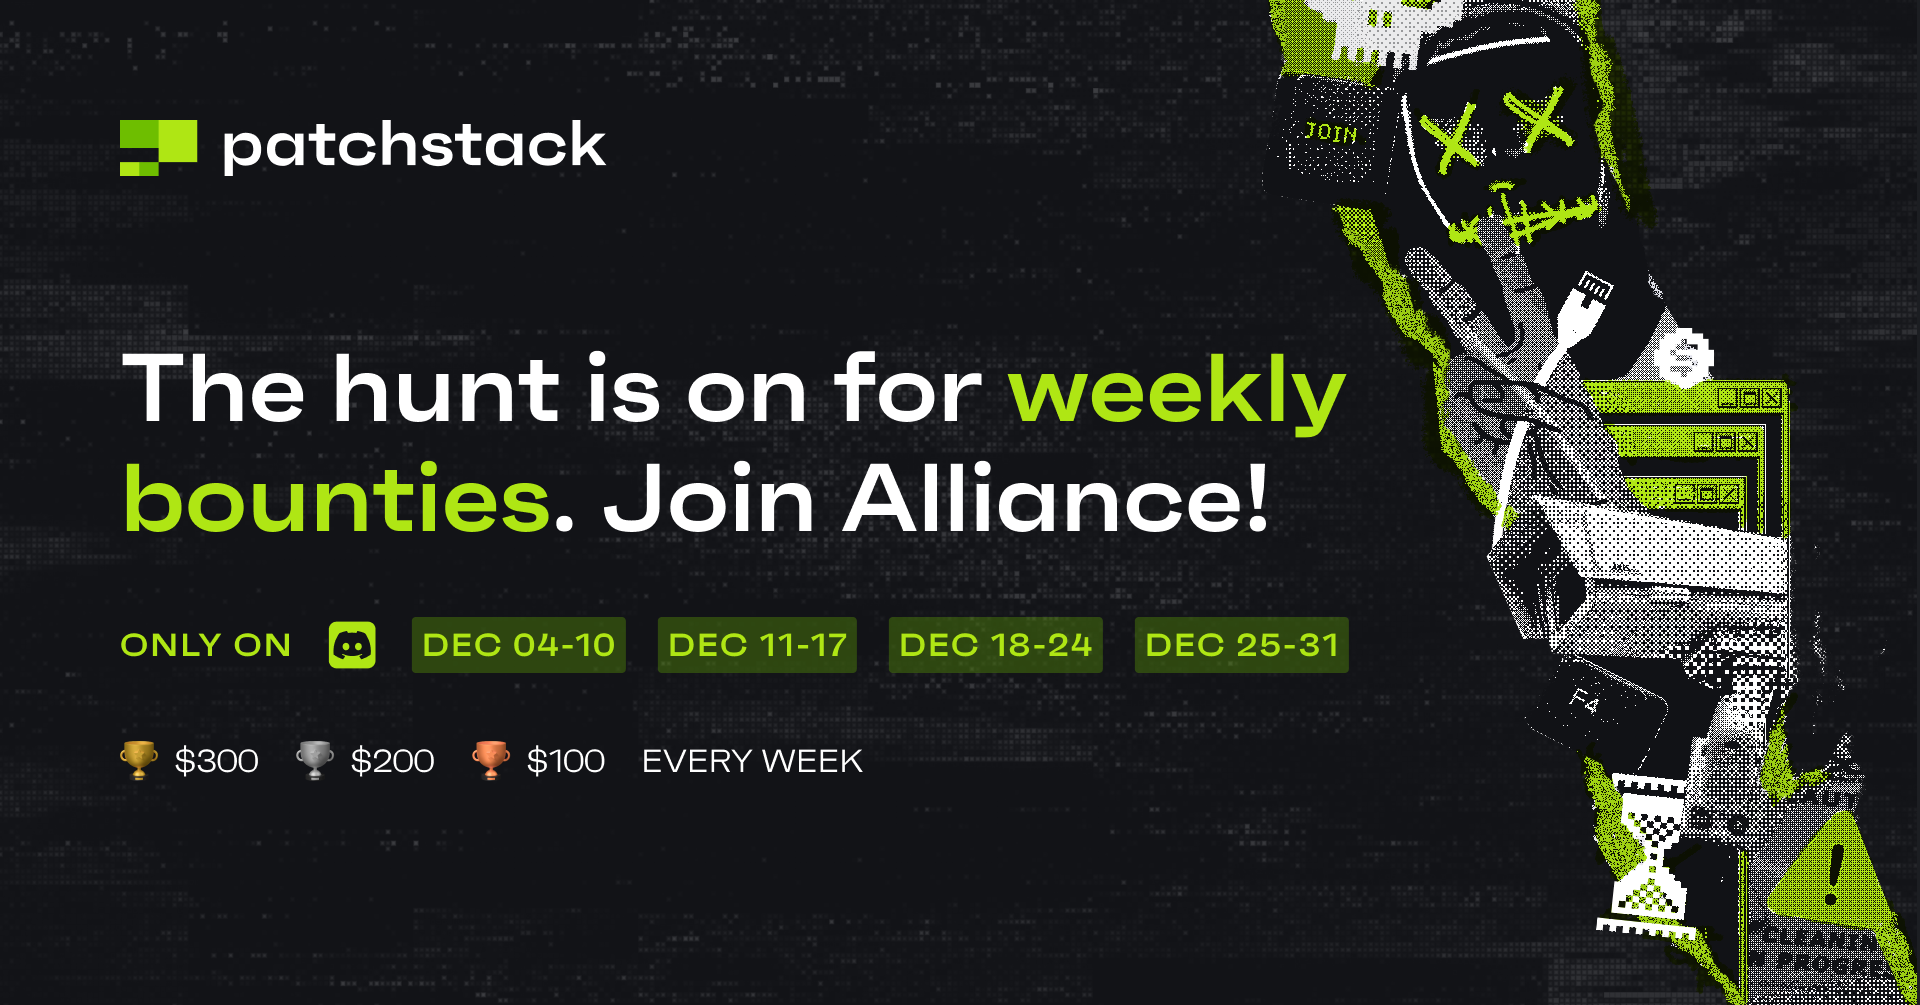 Patchstack Alliance weekly events for December